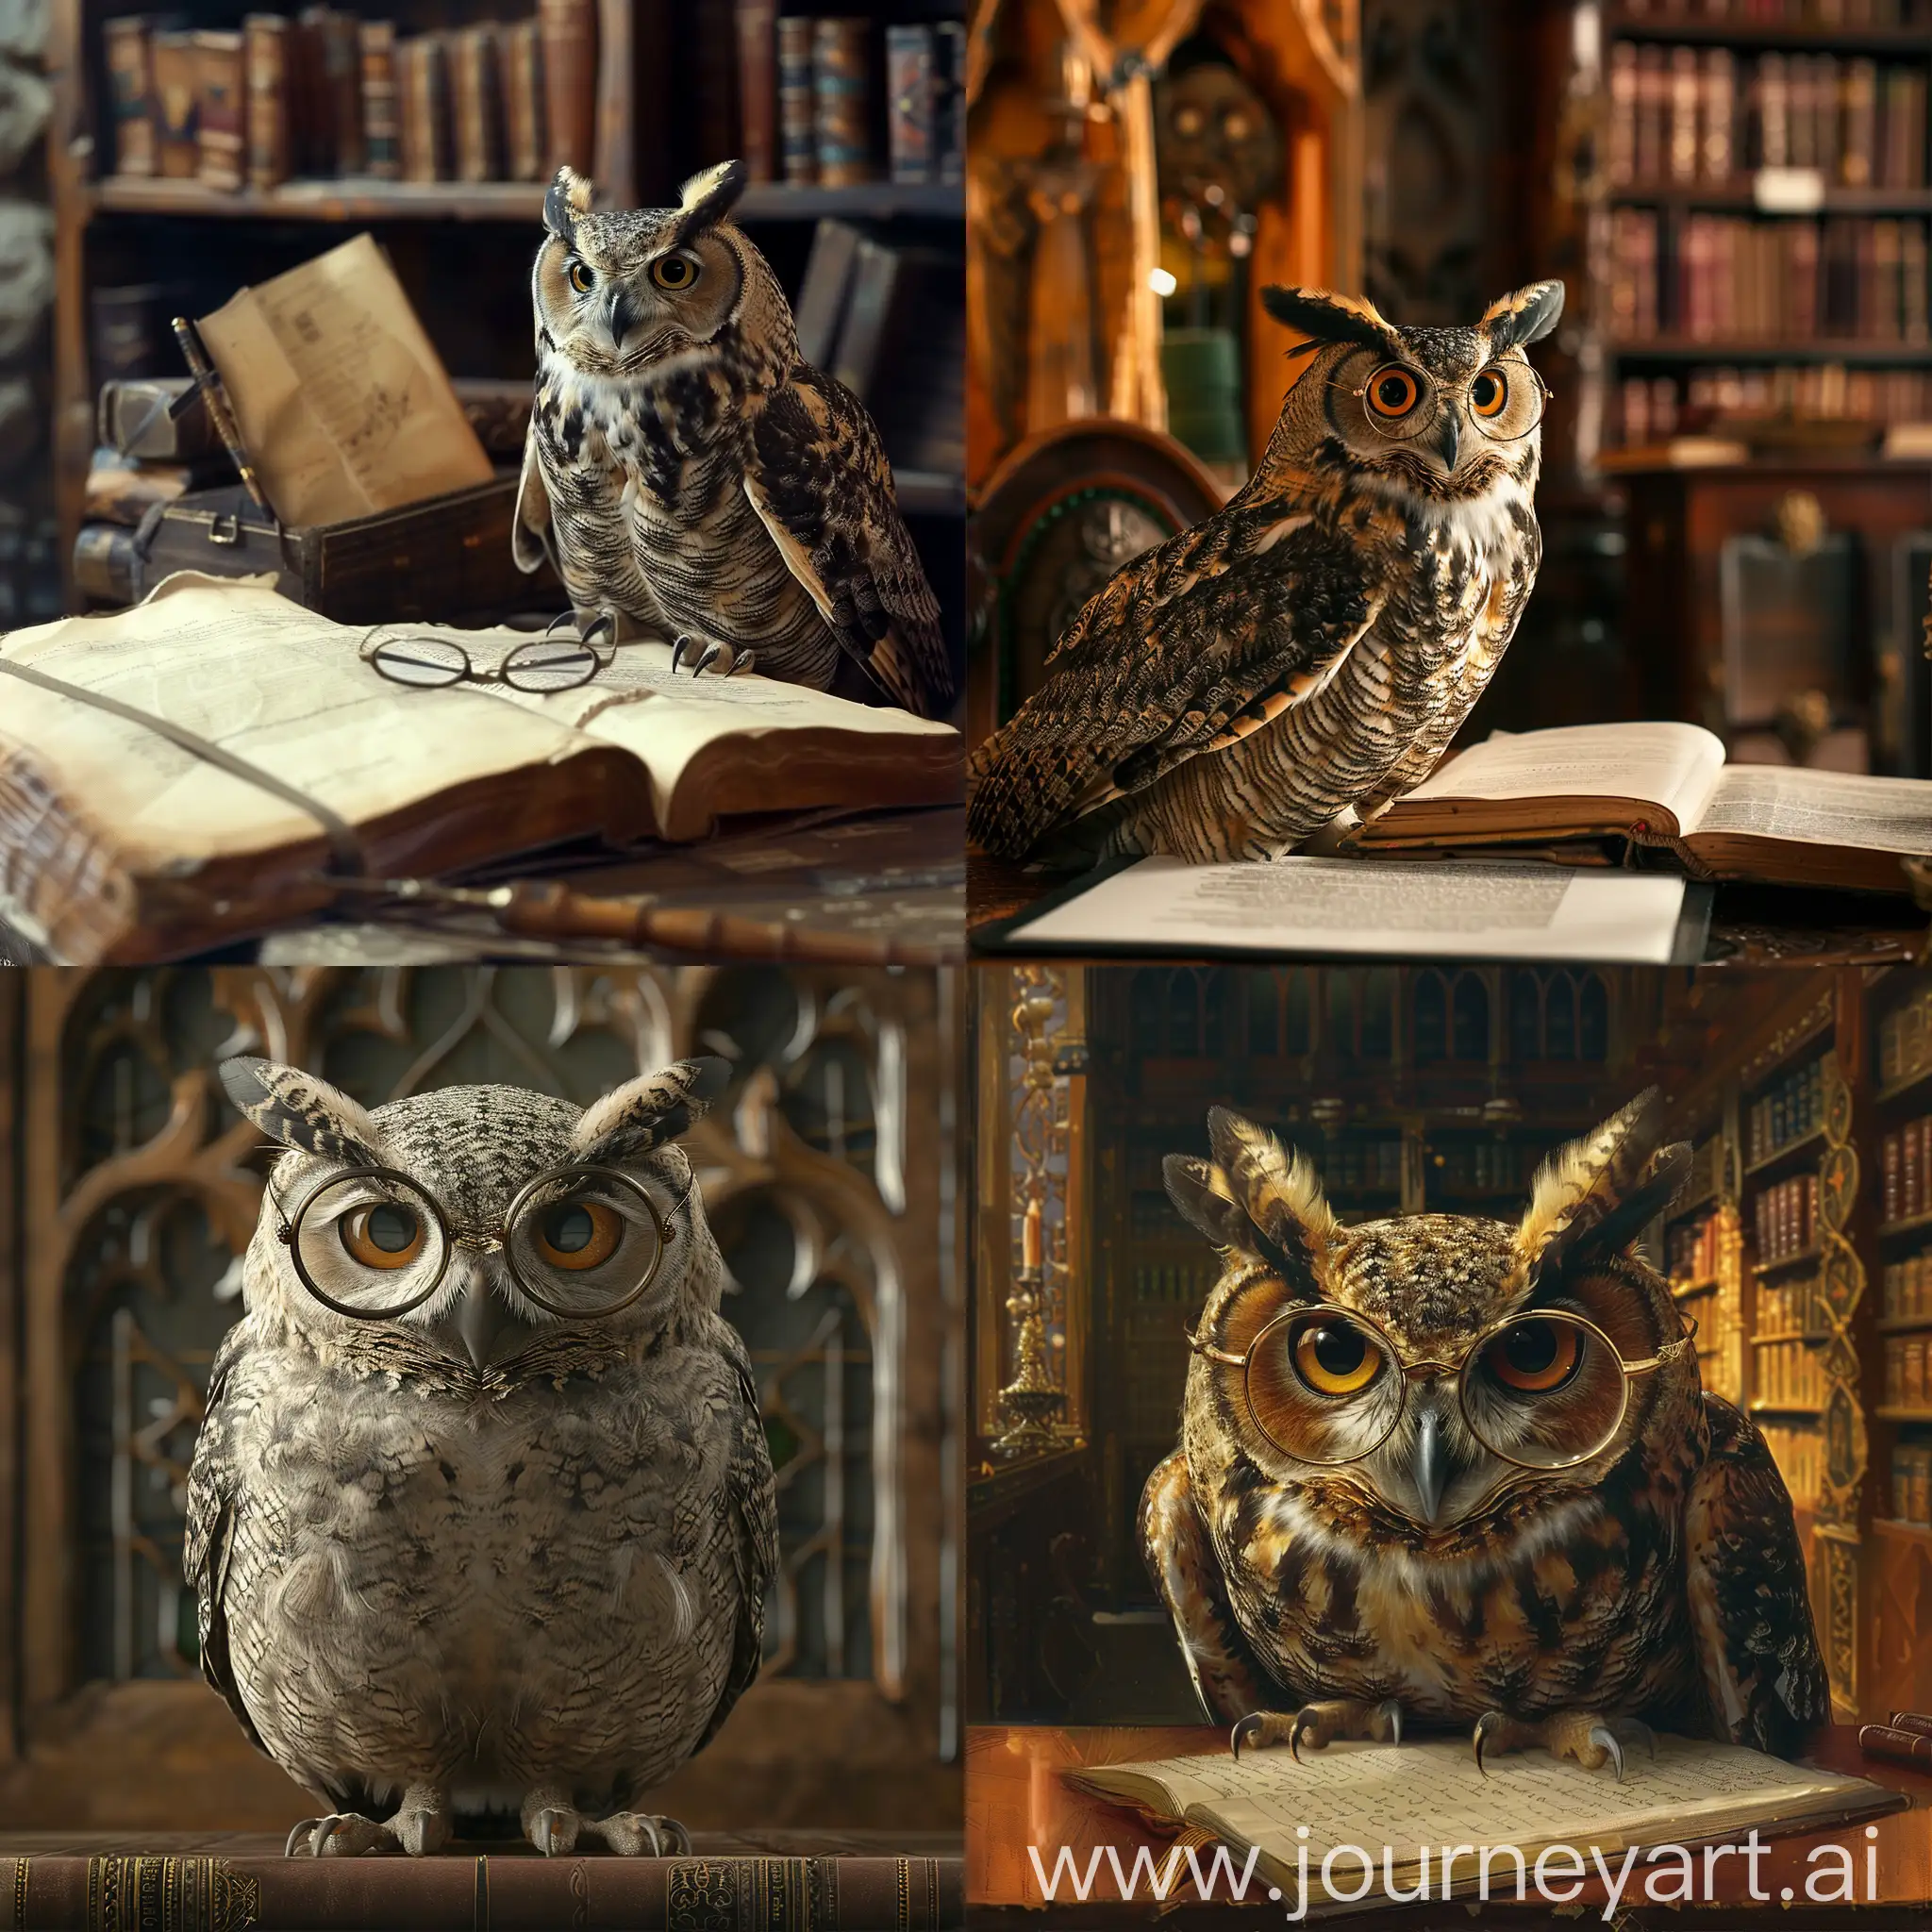 Wise-Owl-Notary-in-Medieval-Setting